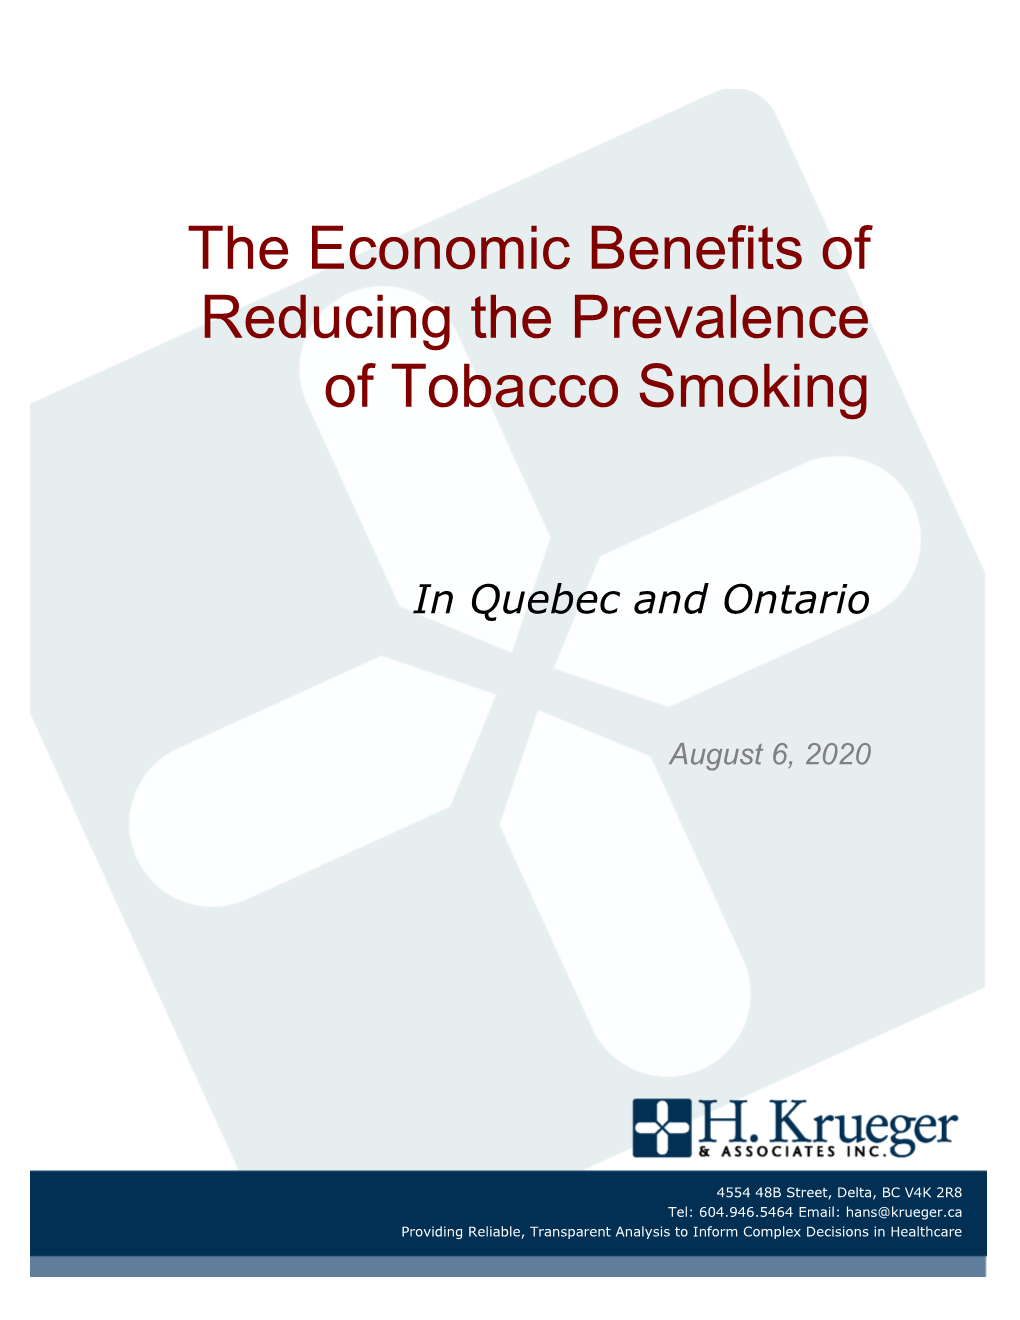 The Economic Benefits of Reducing the Prevalence of Tobacco Smoking